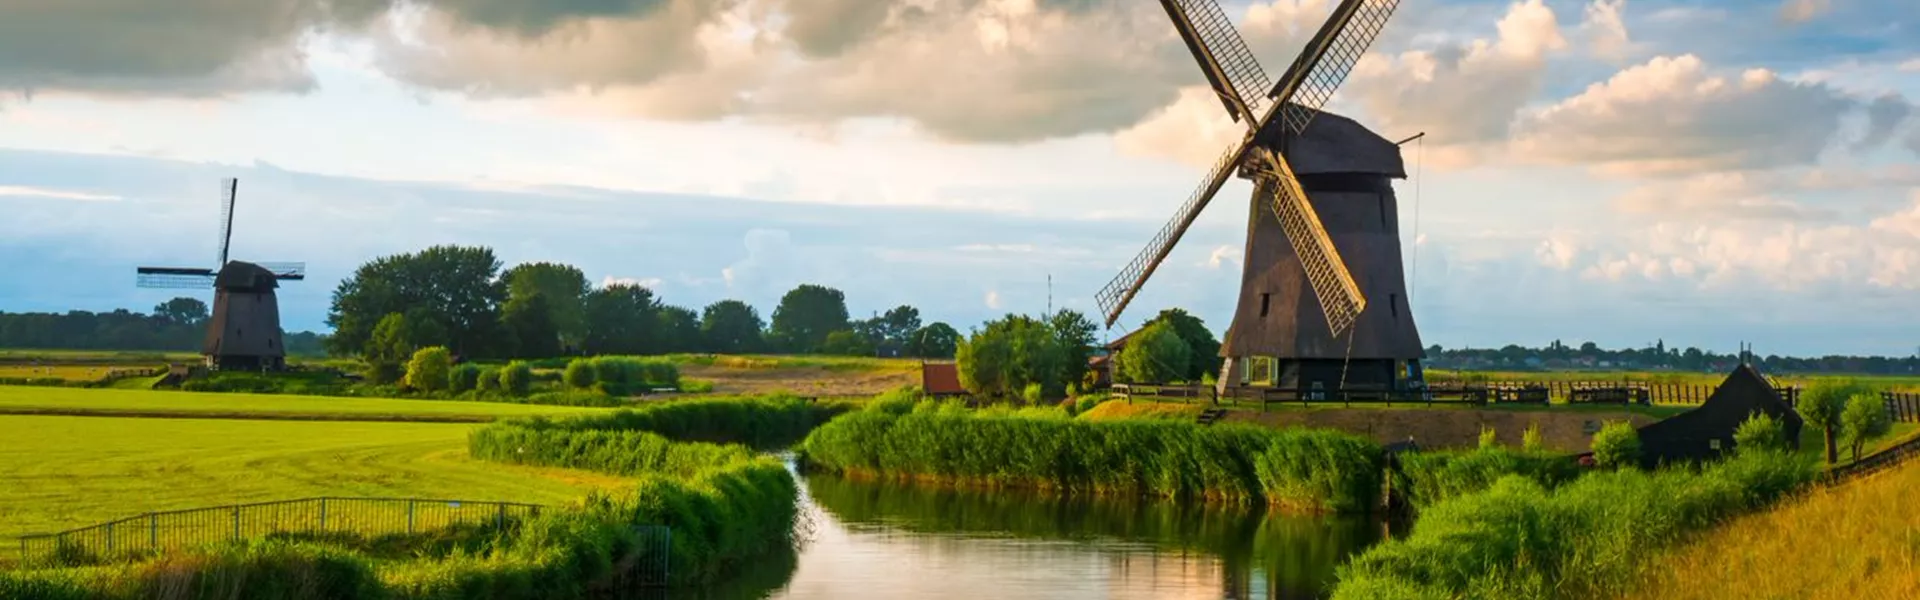 Windmills and a river, Netherlands.